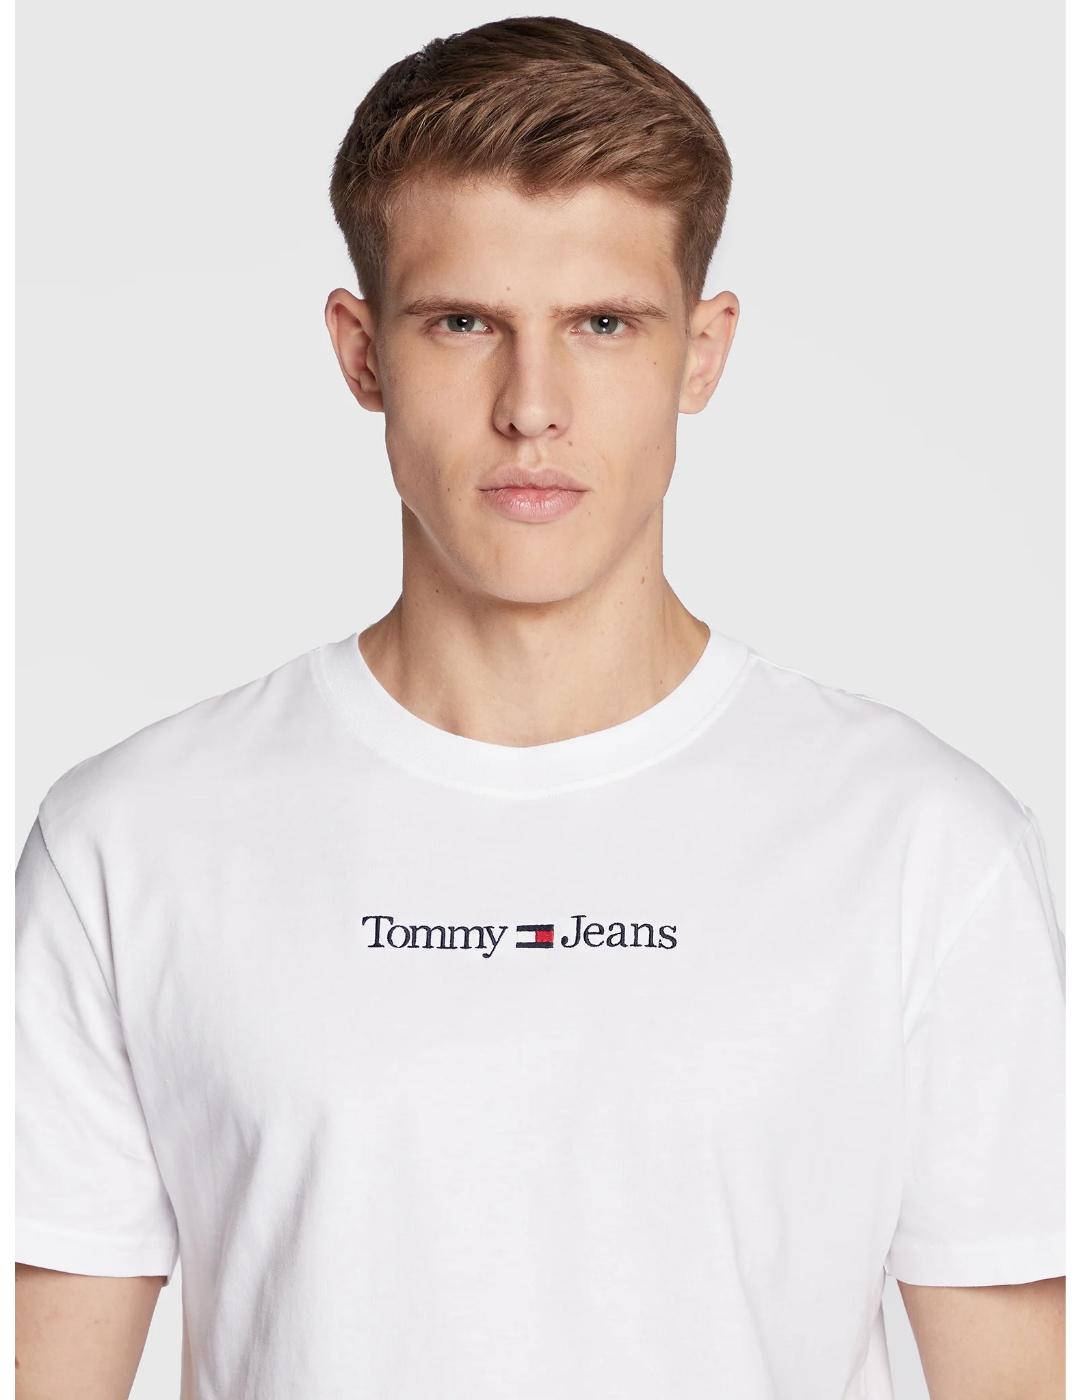 Camiseta Tommy Jeans linear blanca para hombre